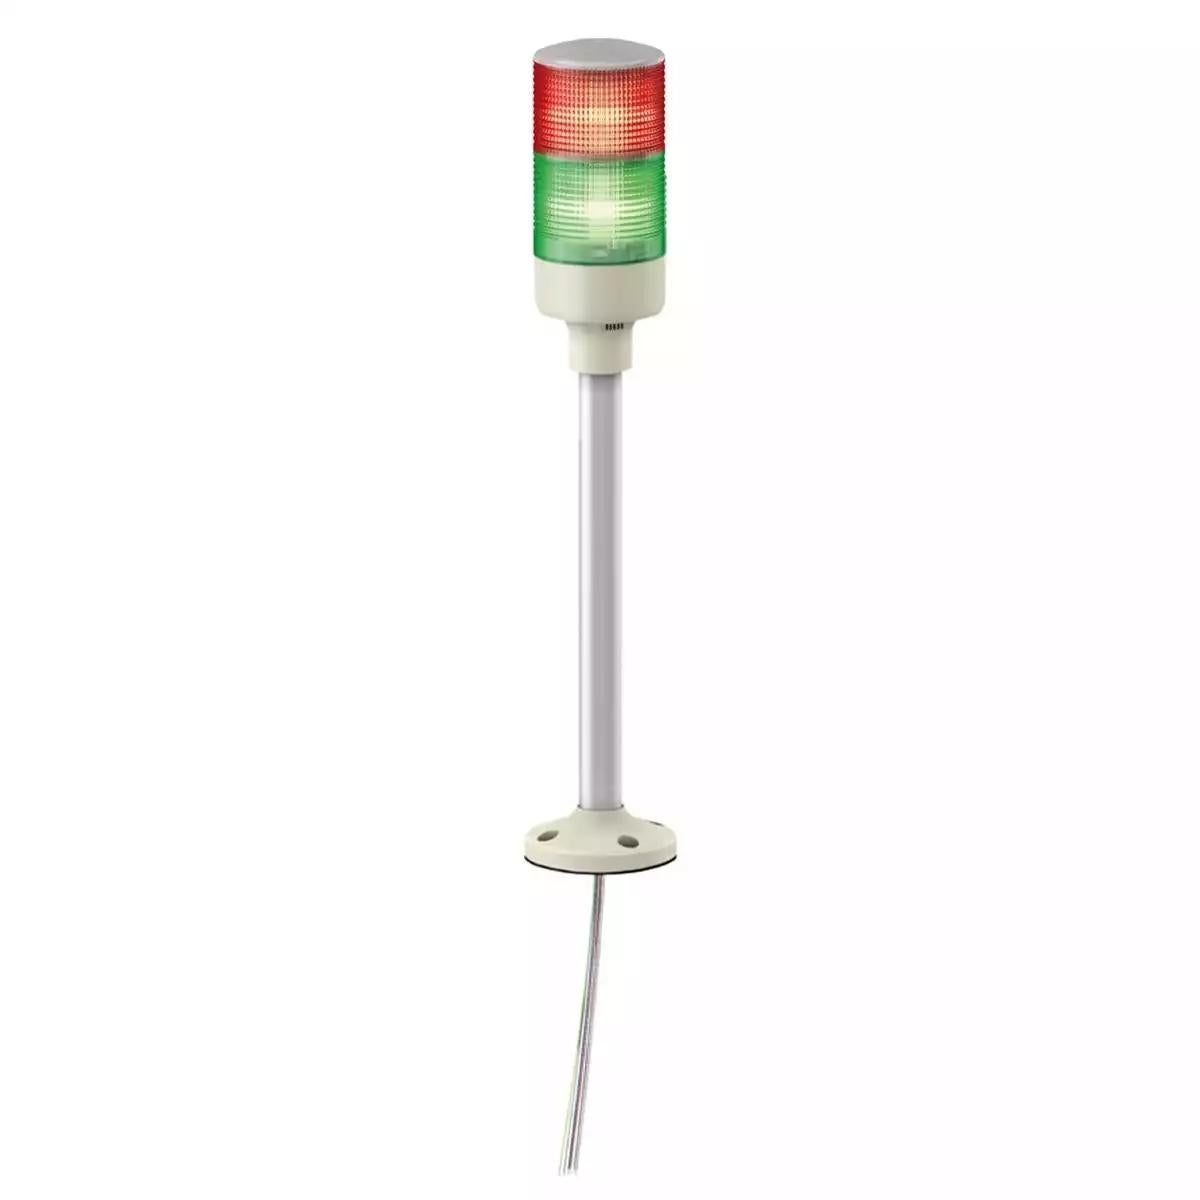 Tower Light - RG - 24V - LED - W.Buzzer - Tube mounting with fixing plate